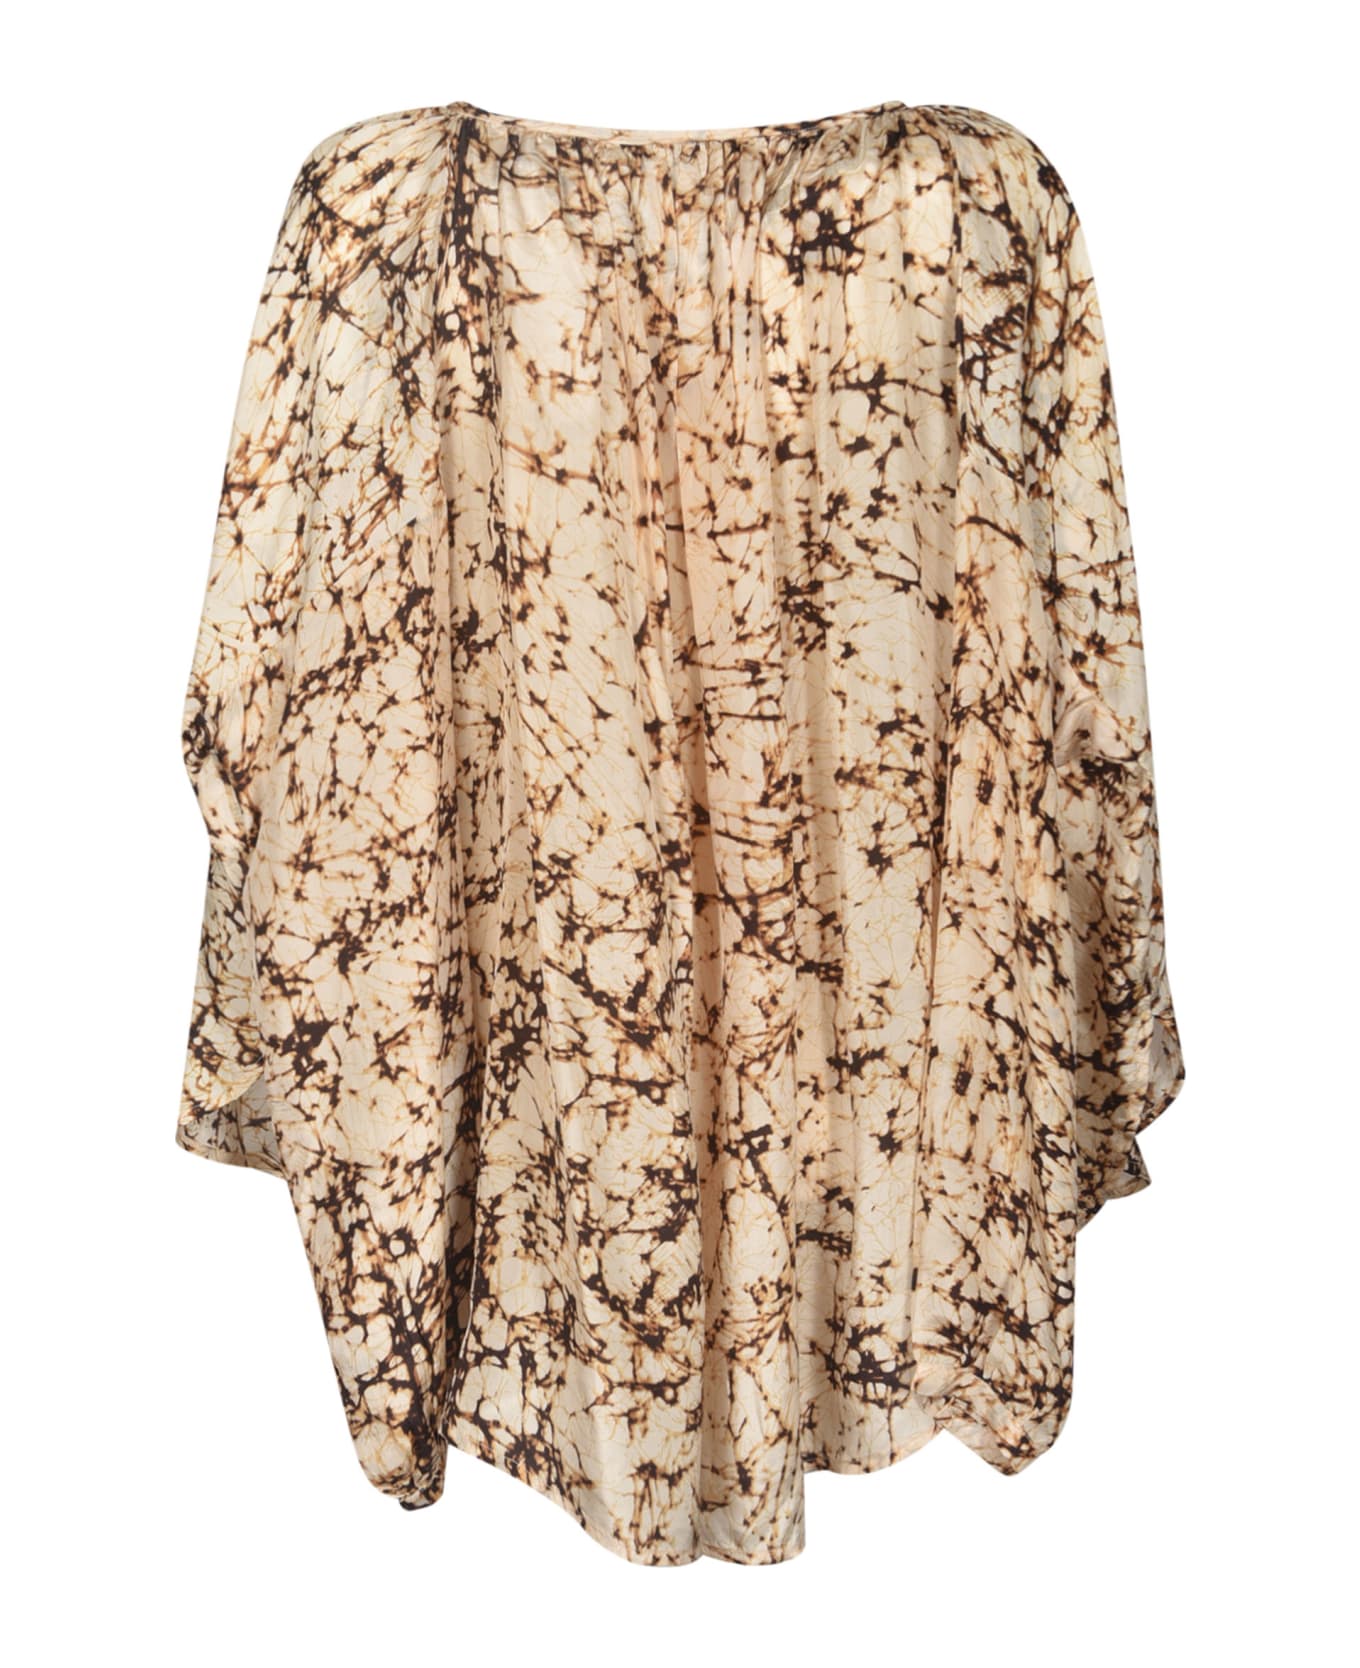 Mes Demoiselles Oversized Printed Blouse - Brown ブラウス